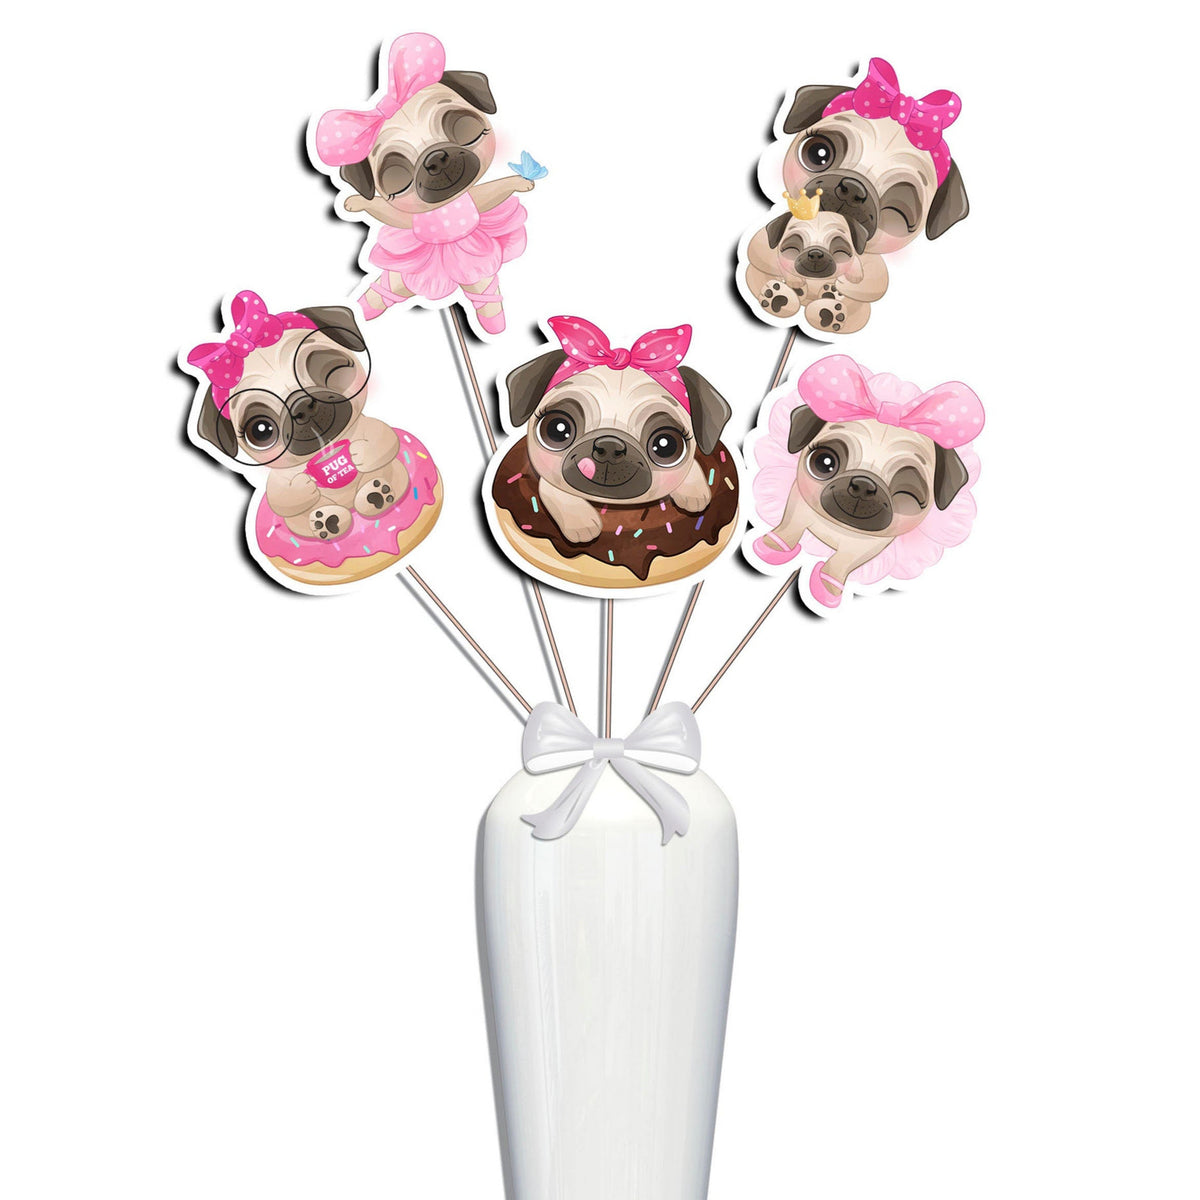 Set of 5 Pug Dog Centerpieces – Ideal for Baby Showers and Birthday Parties